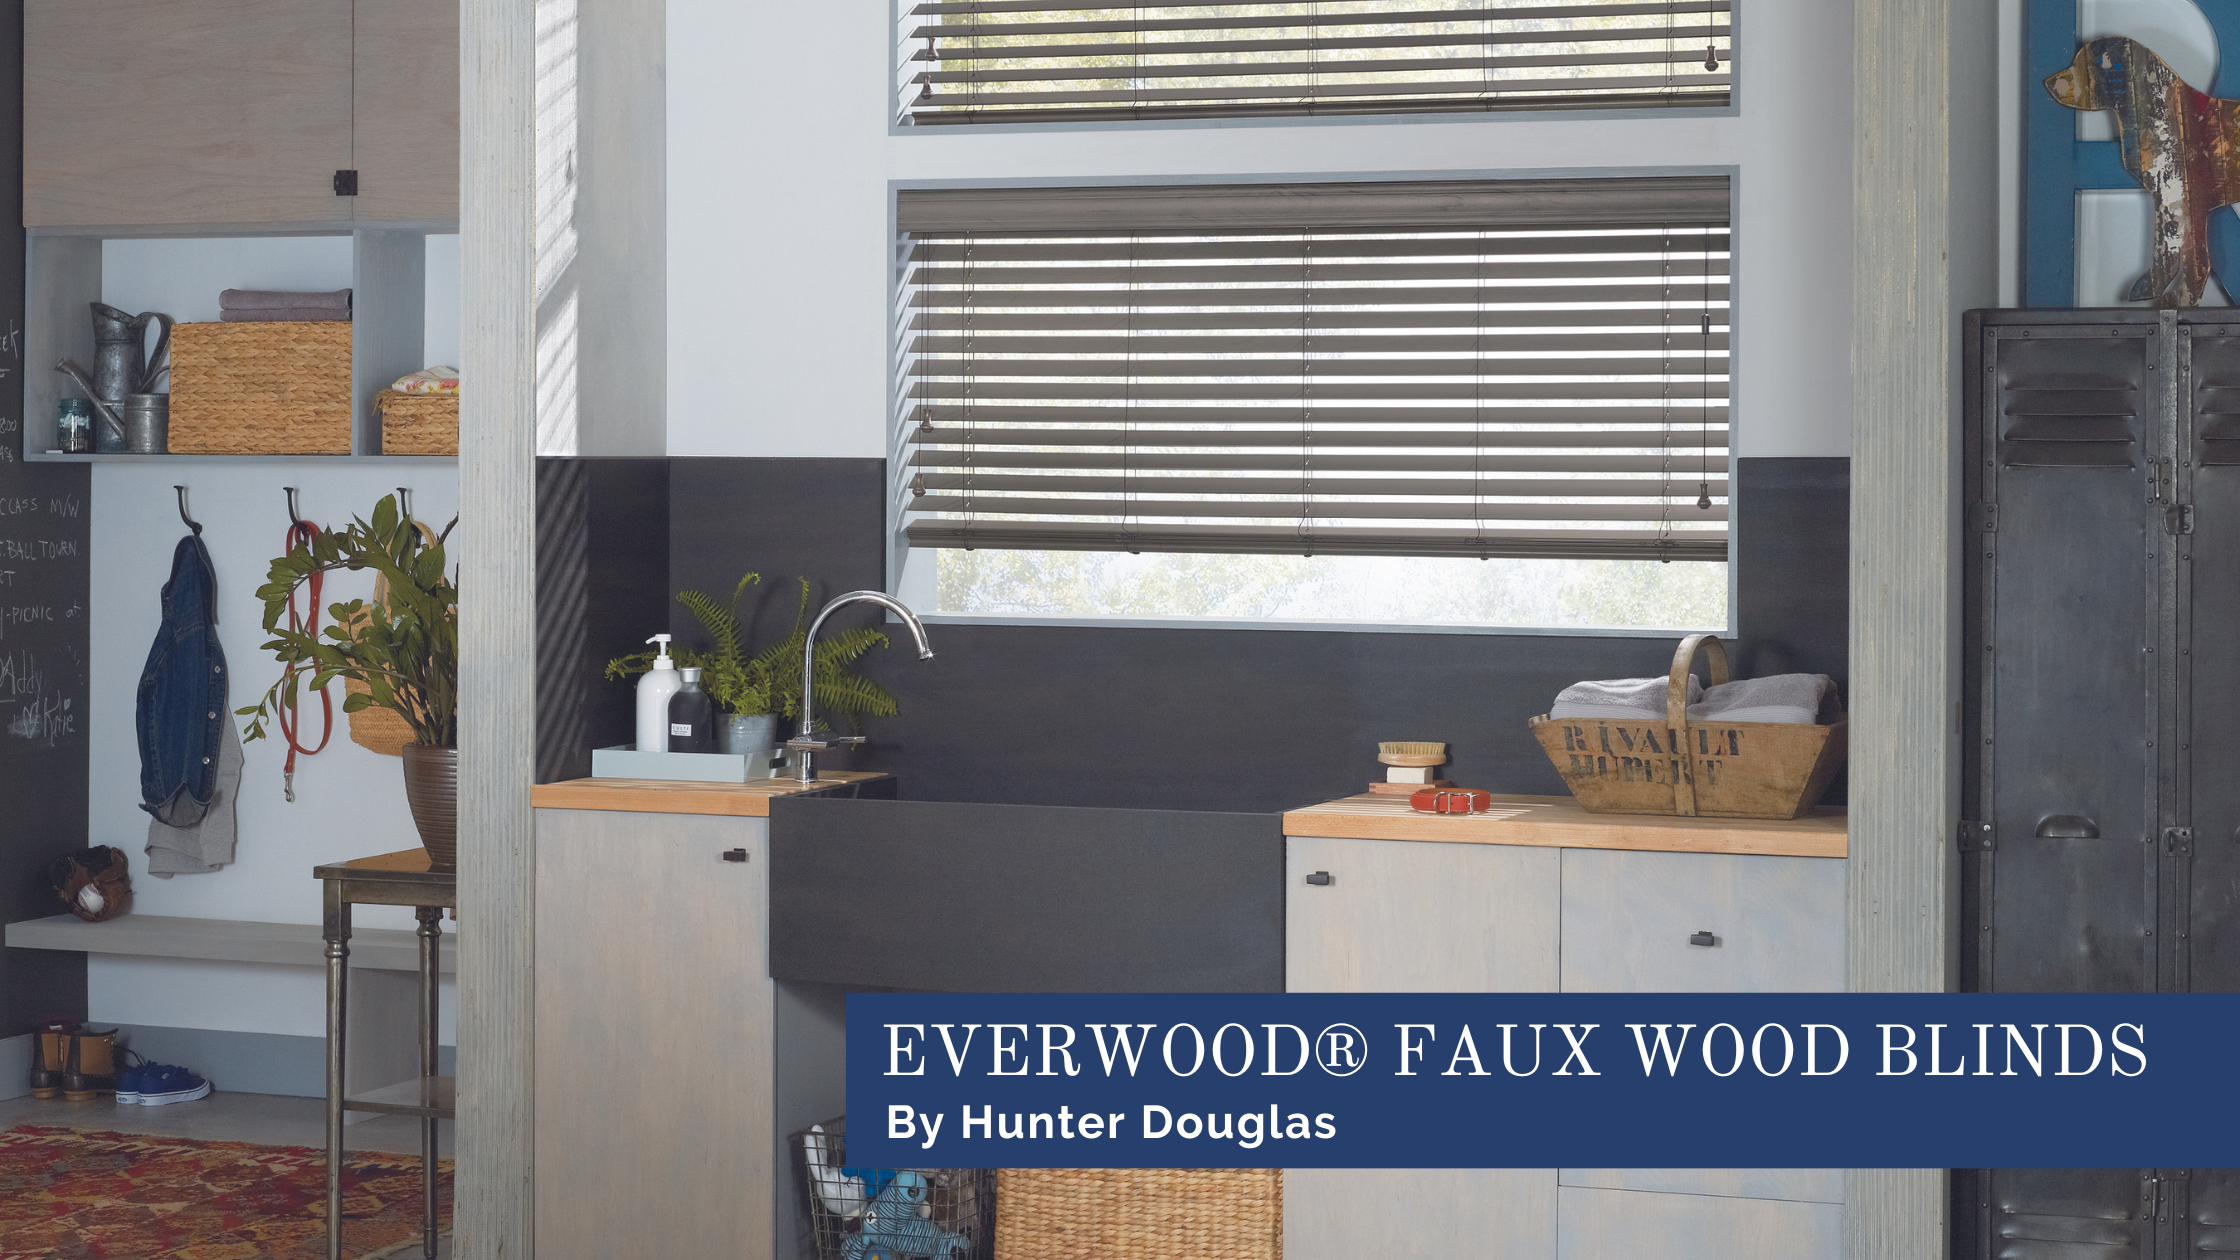 Hunter Douglas Everwood® Faux Wood Blinds at JC Licht near Chicago, Illinois (IL) and Midwest 